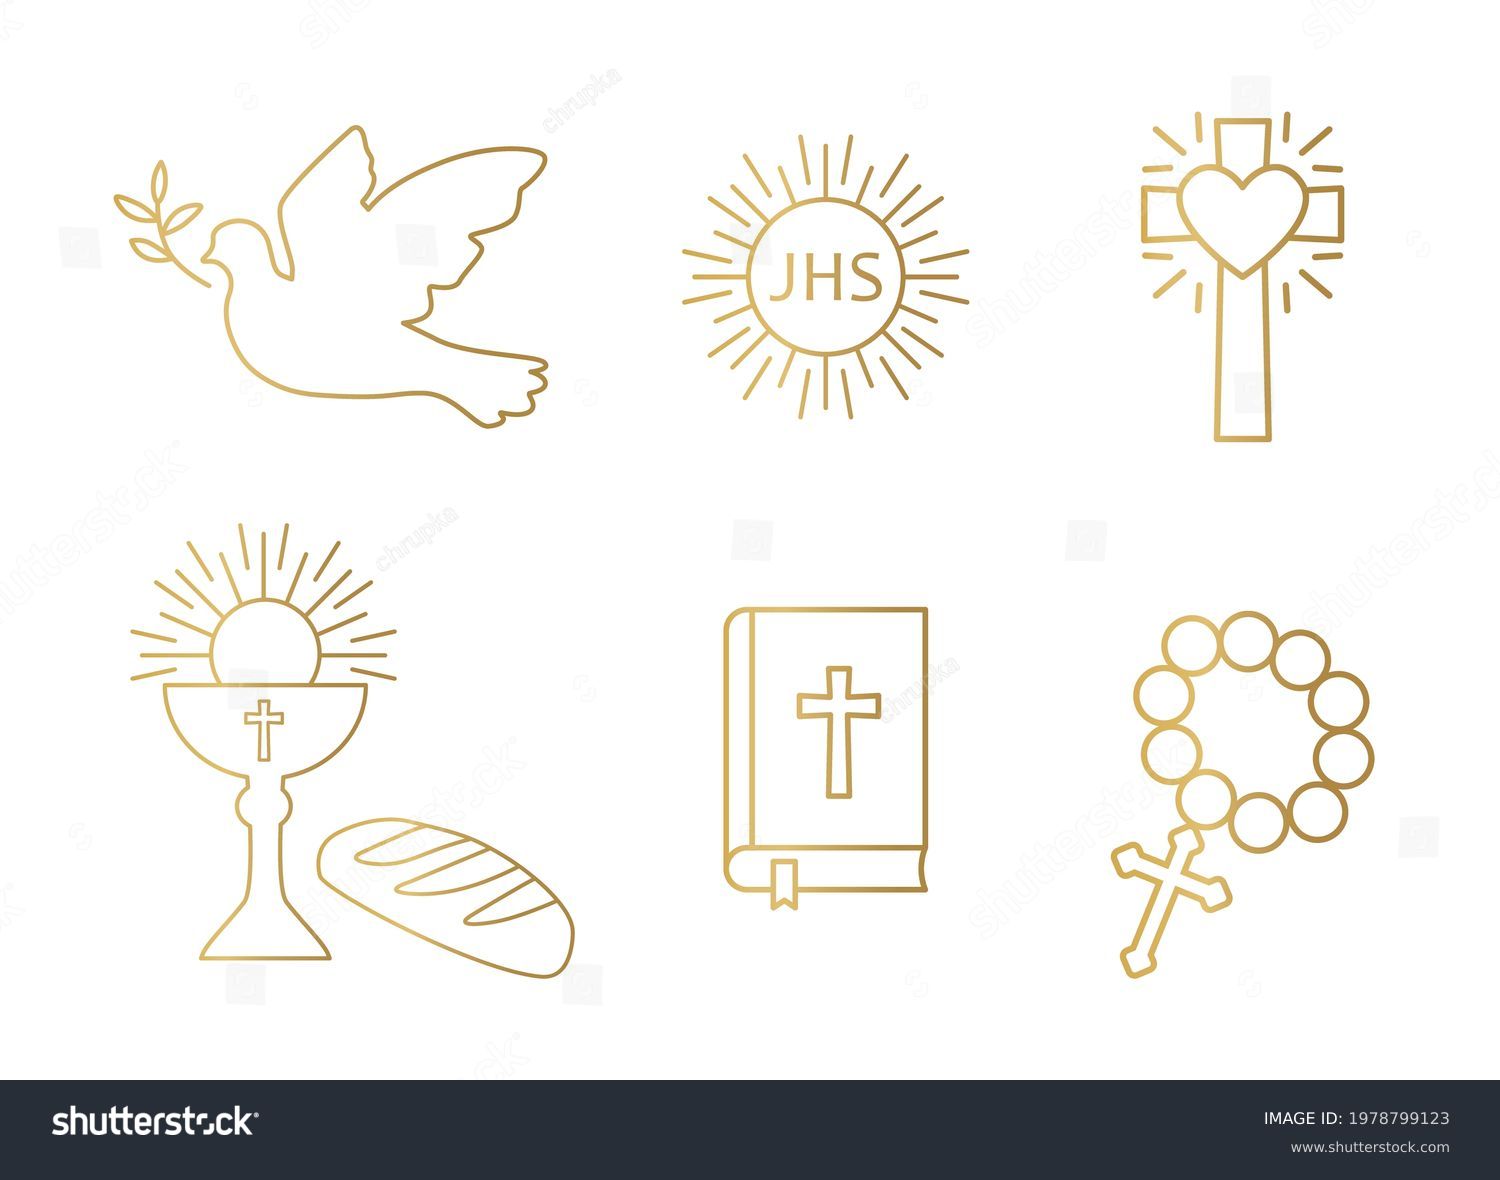 SVG of golden christianity icon set; dove, holy communion, cross, chalice and bread, bible and rosary - vector illustration svg